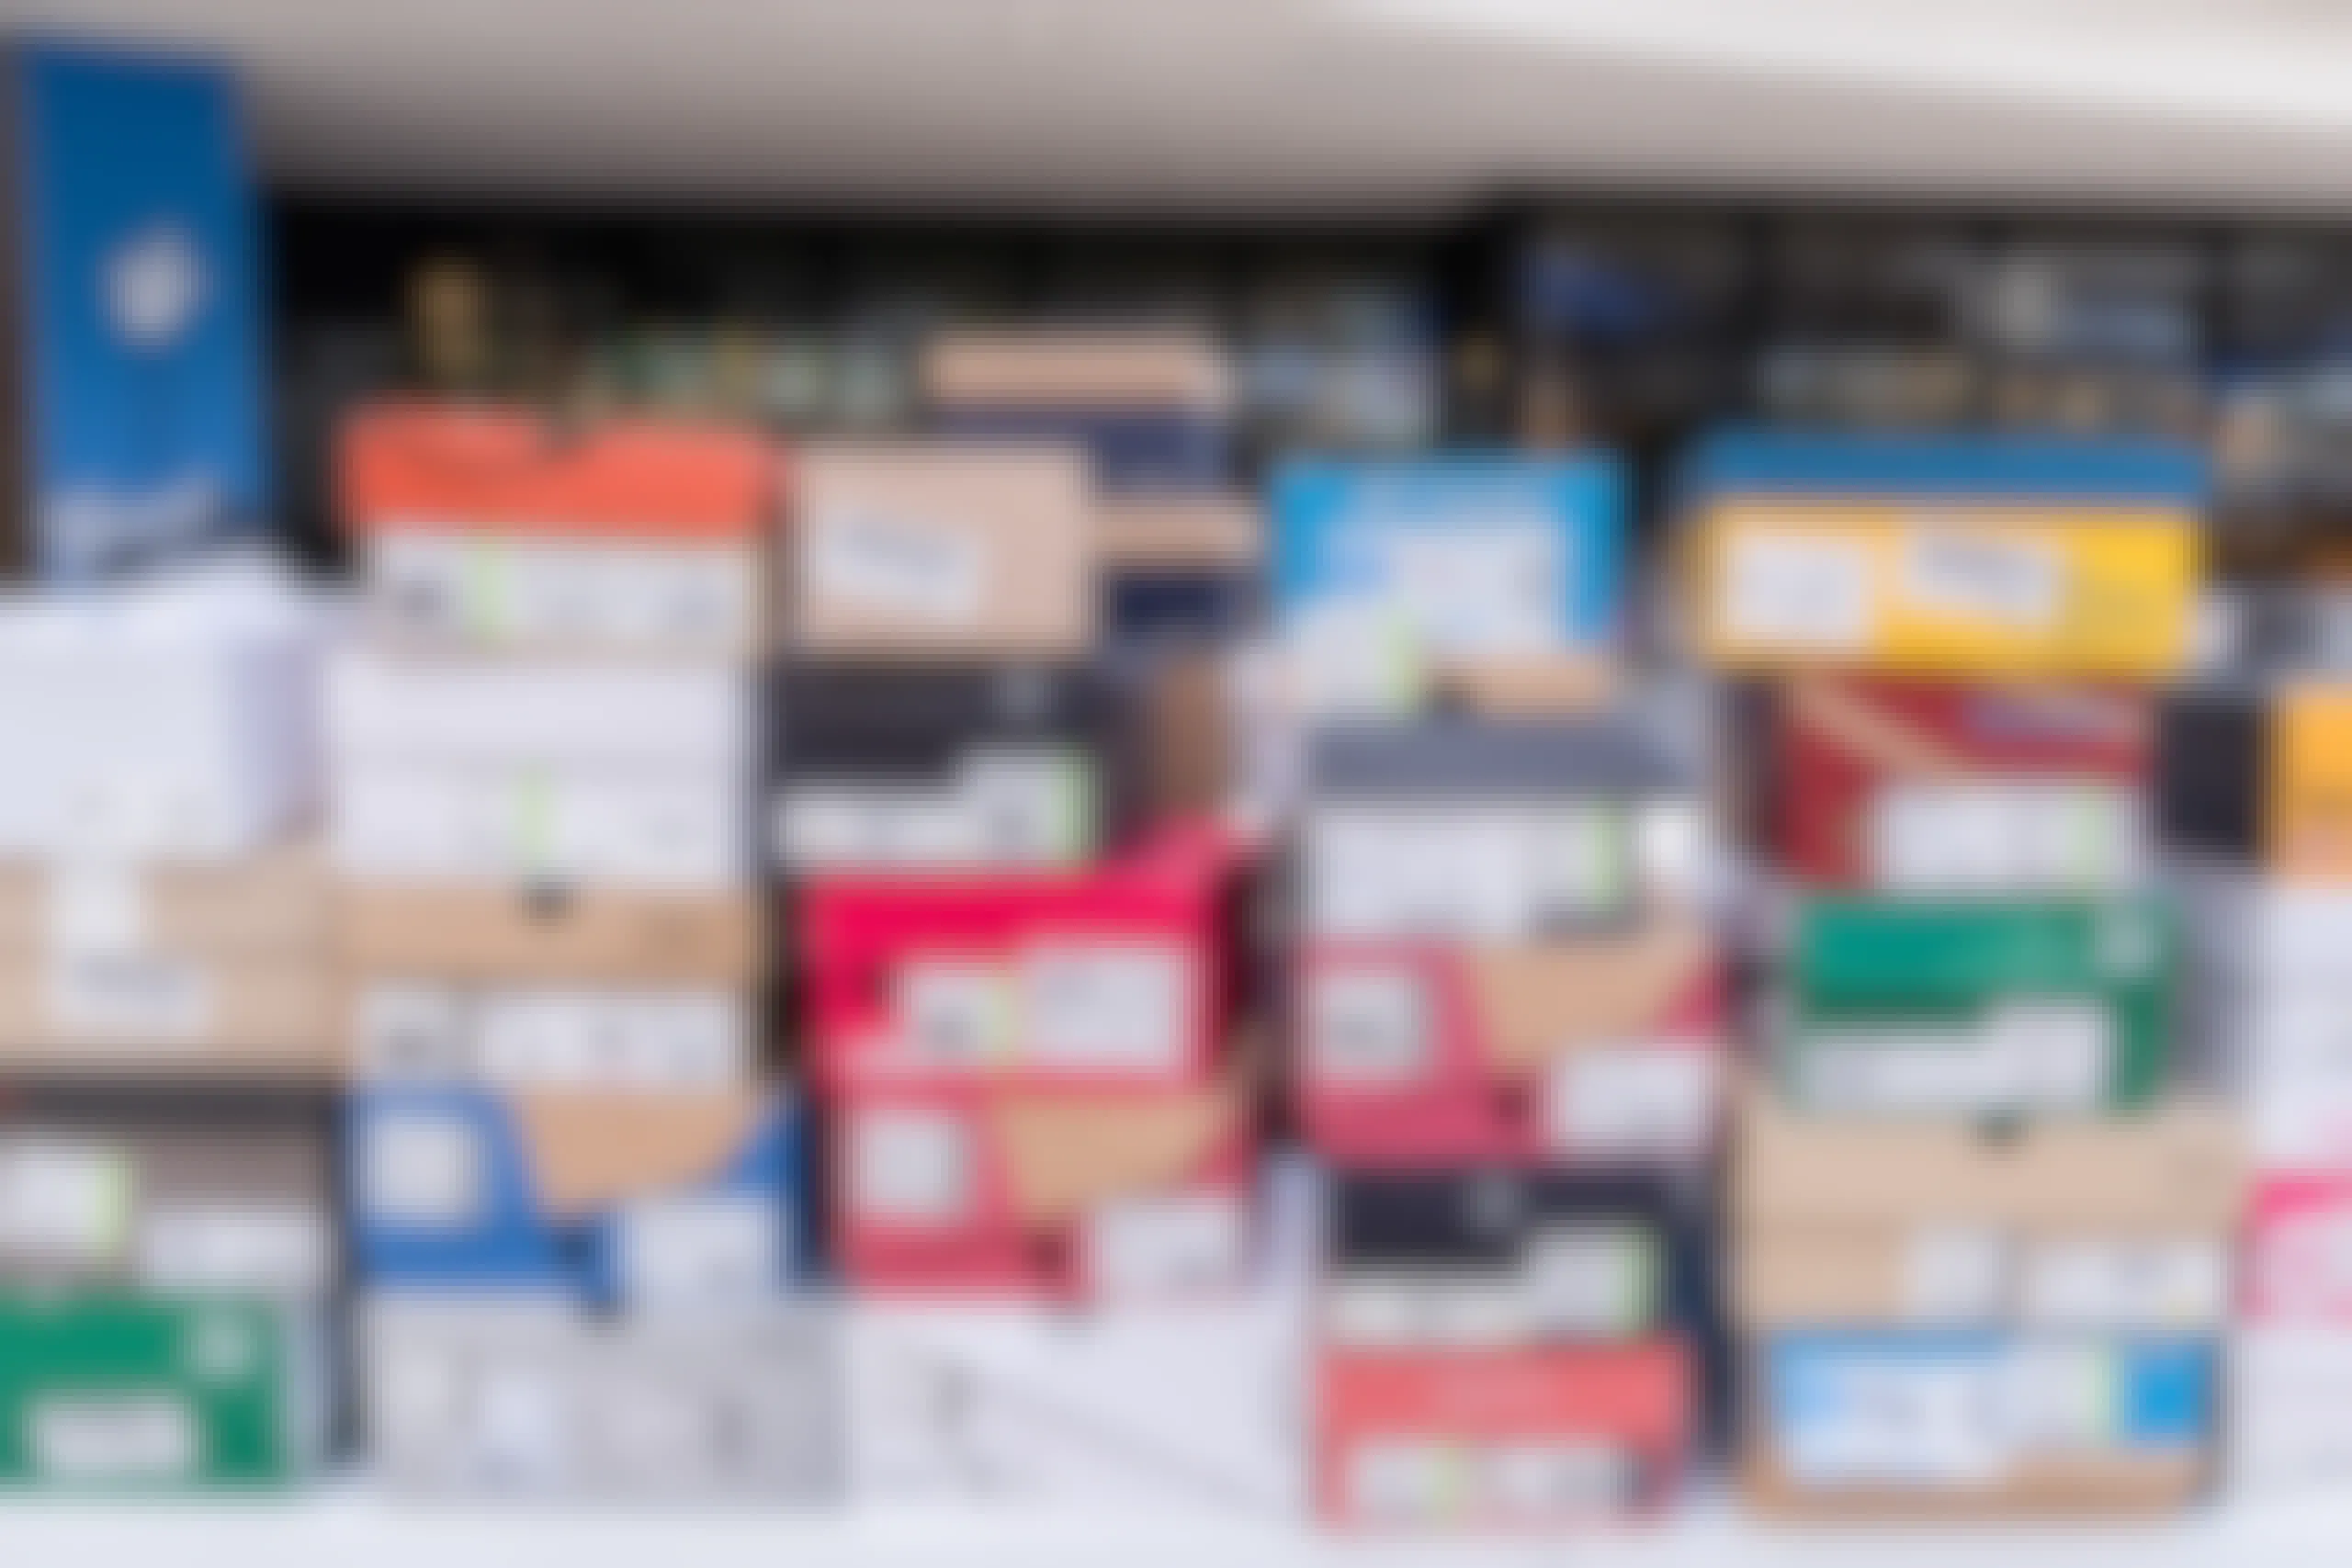 Different brands of shoes in their boxes in a stack